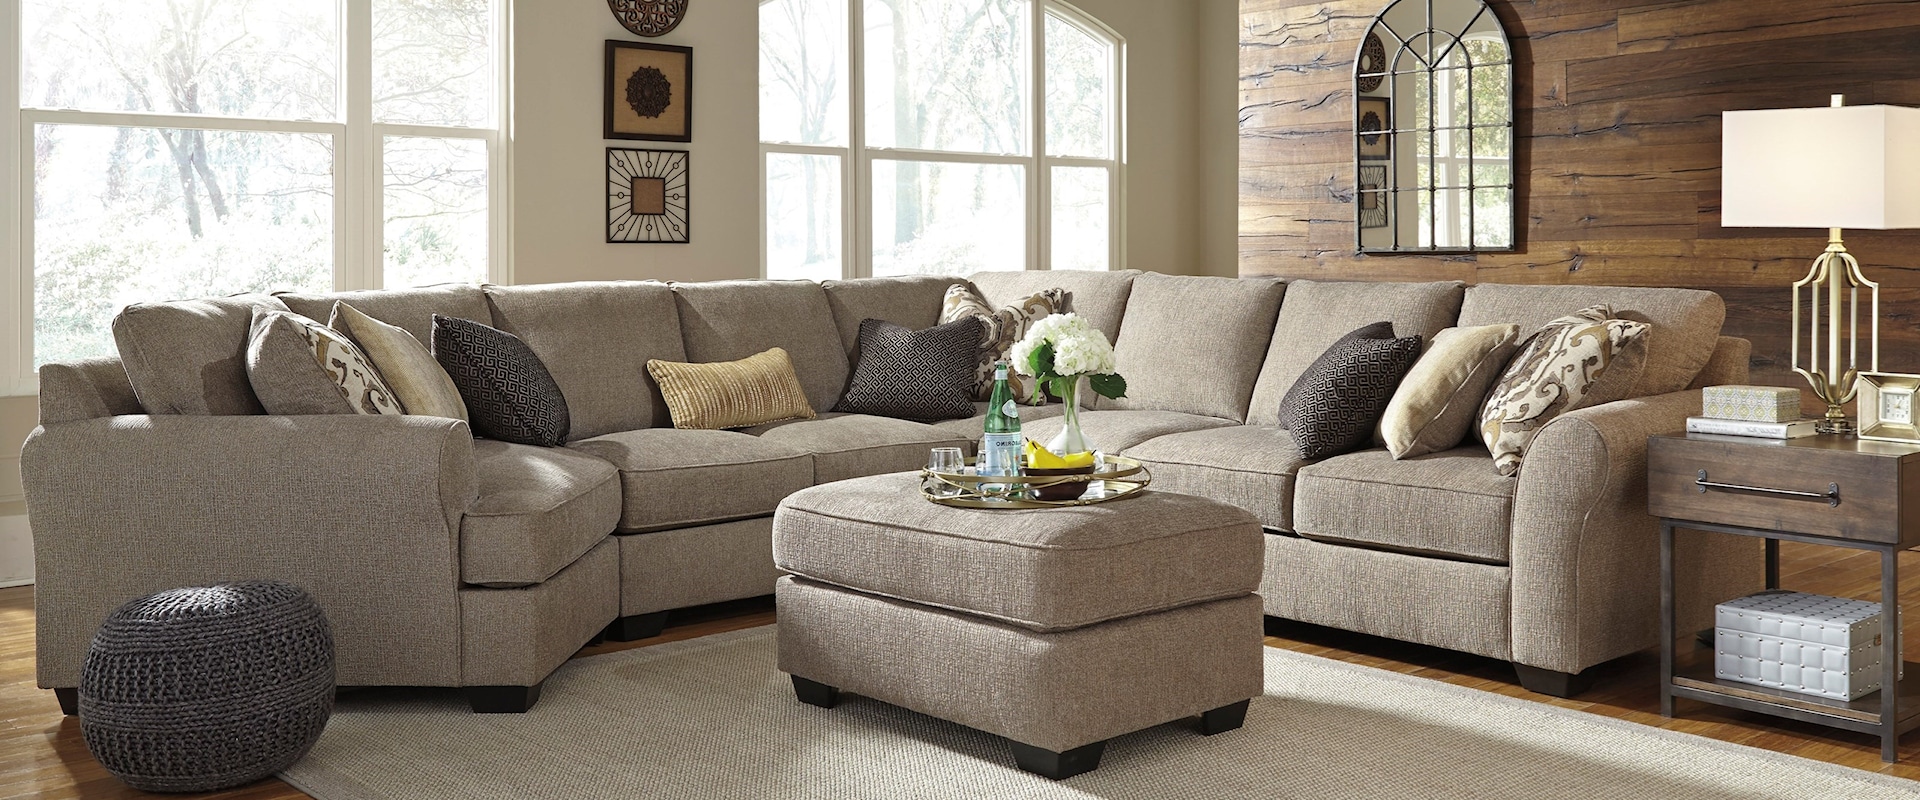 4-Piece Sectional with Ottoman